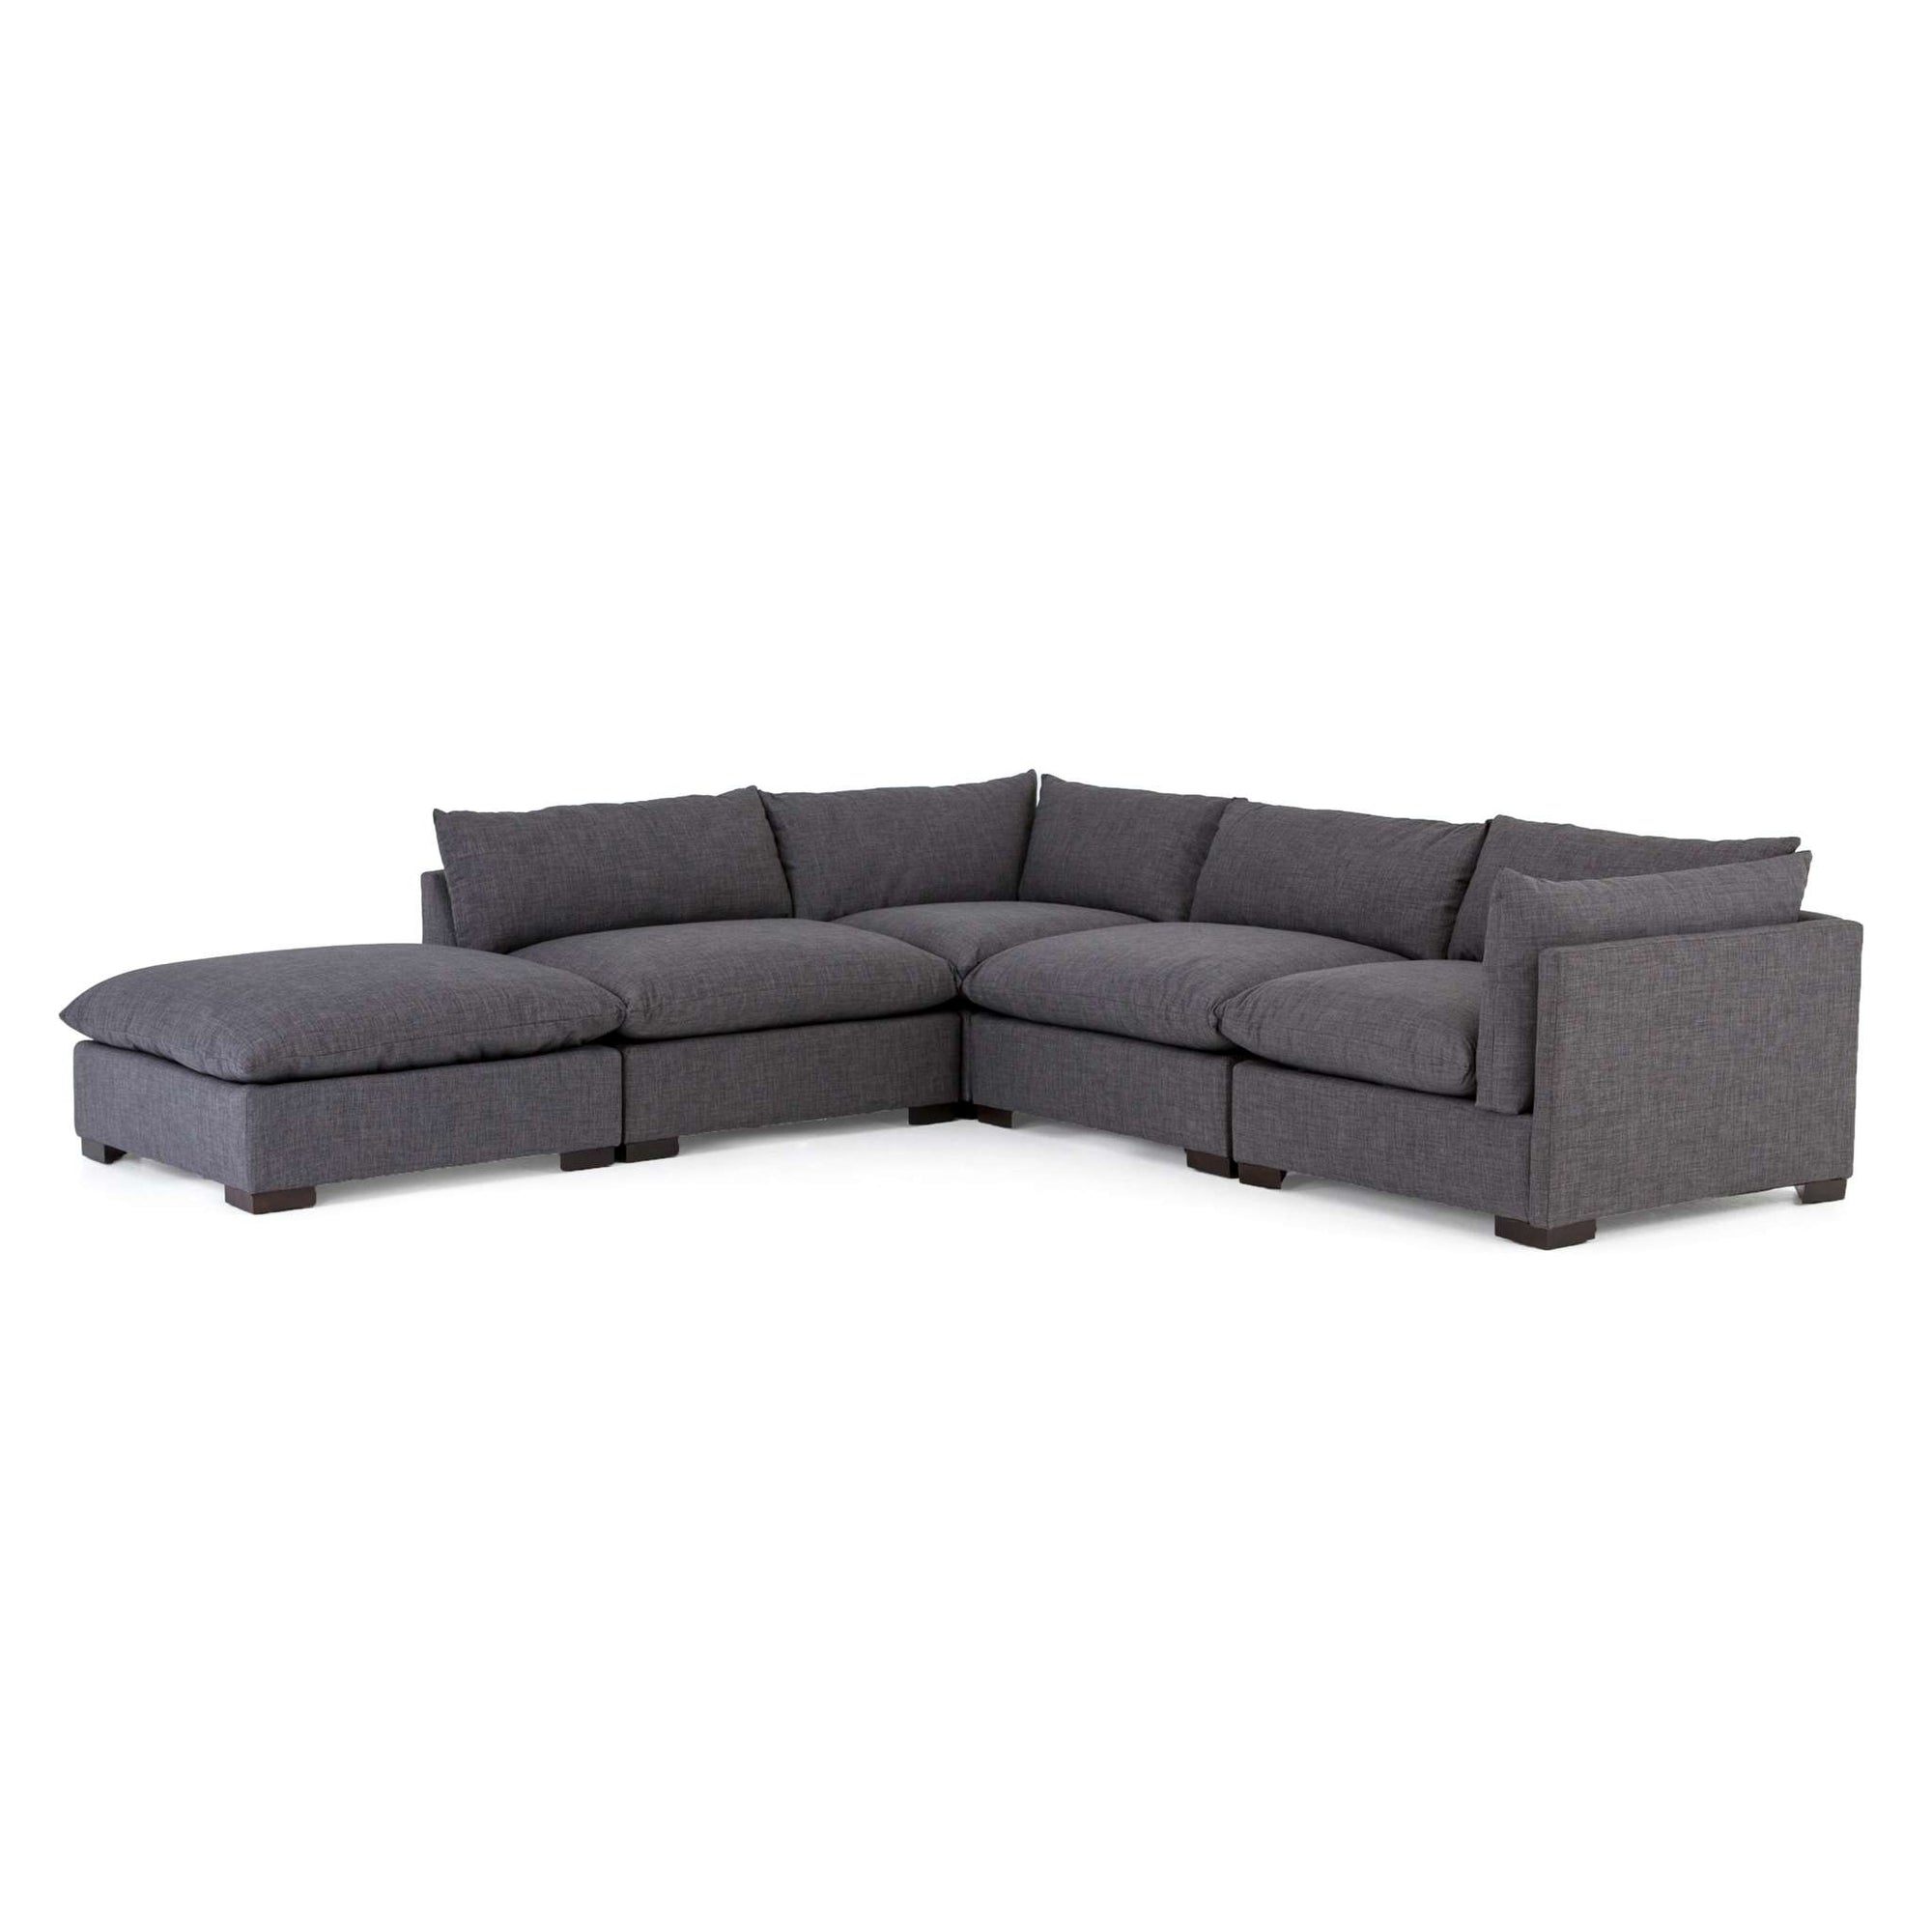 Westwood 4 Piece Sectional